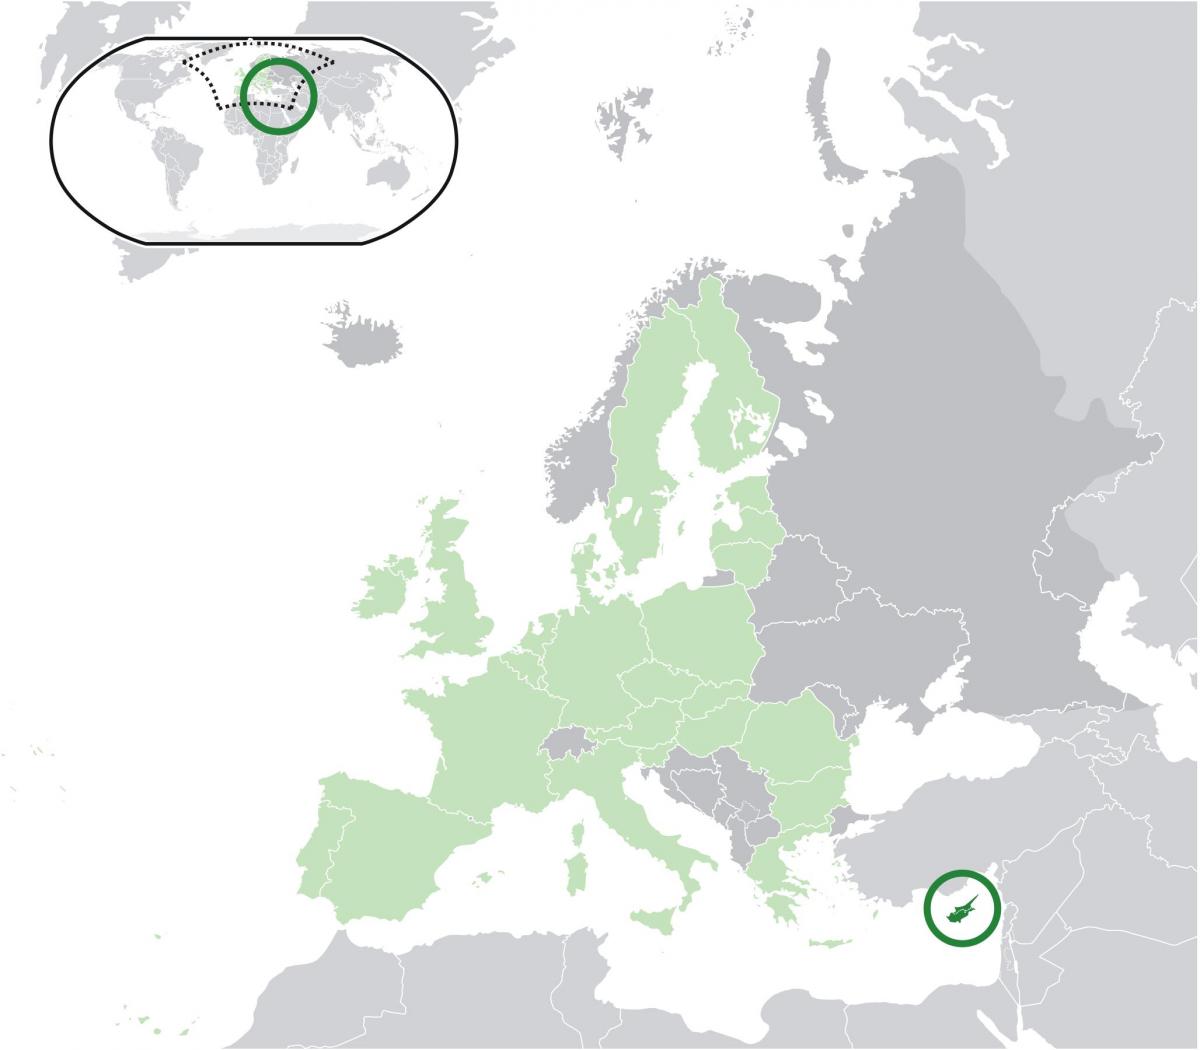 map of europe showing Cyprus